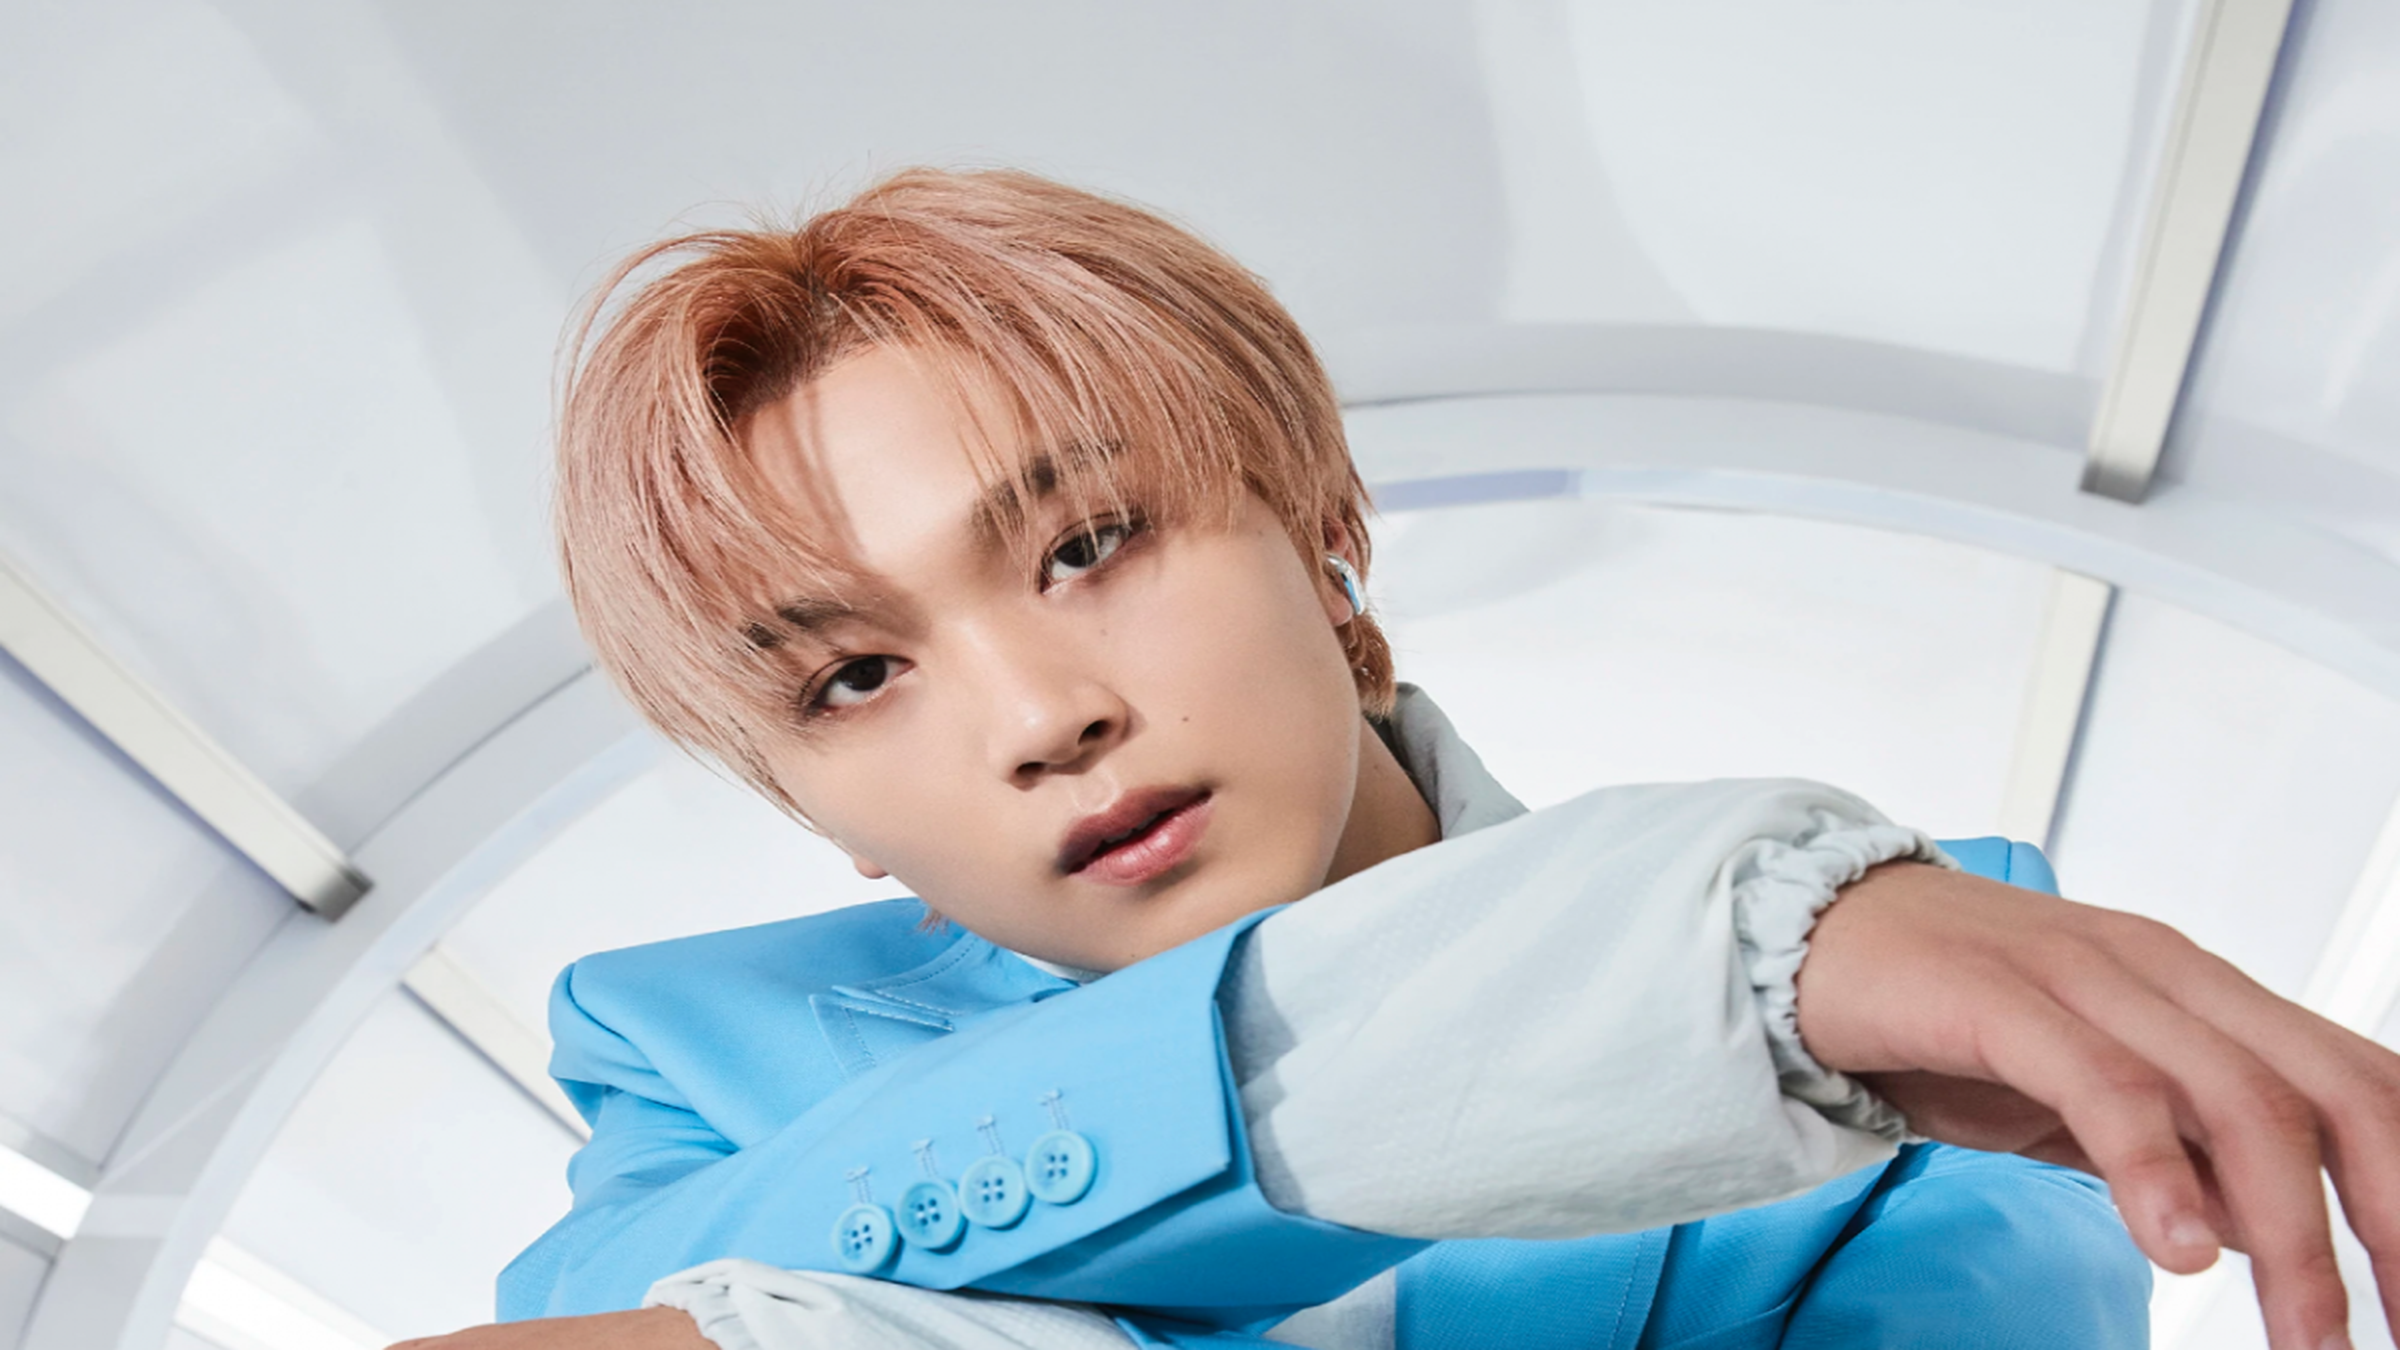 Health problems forces Haechan to postpone his records' promotions